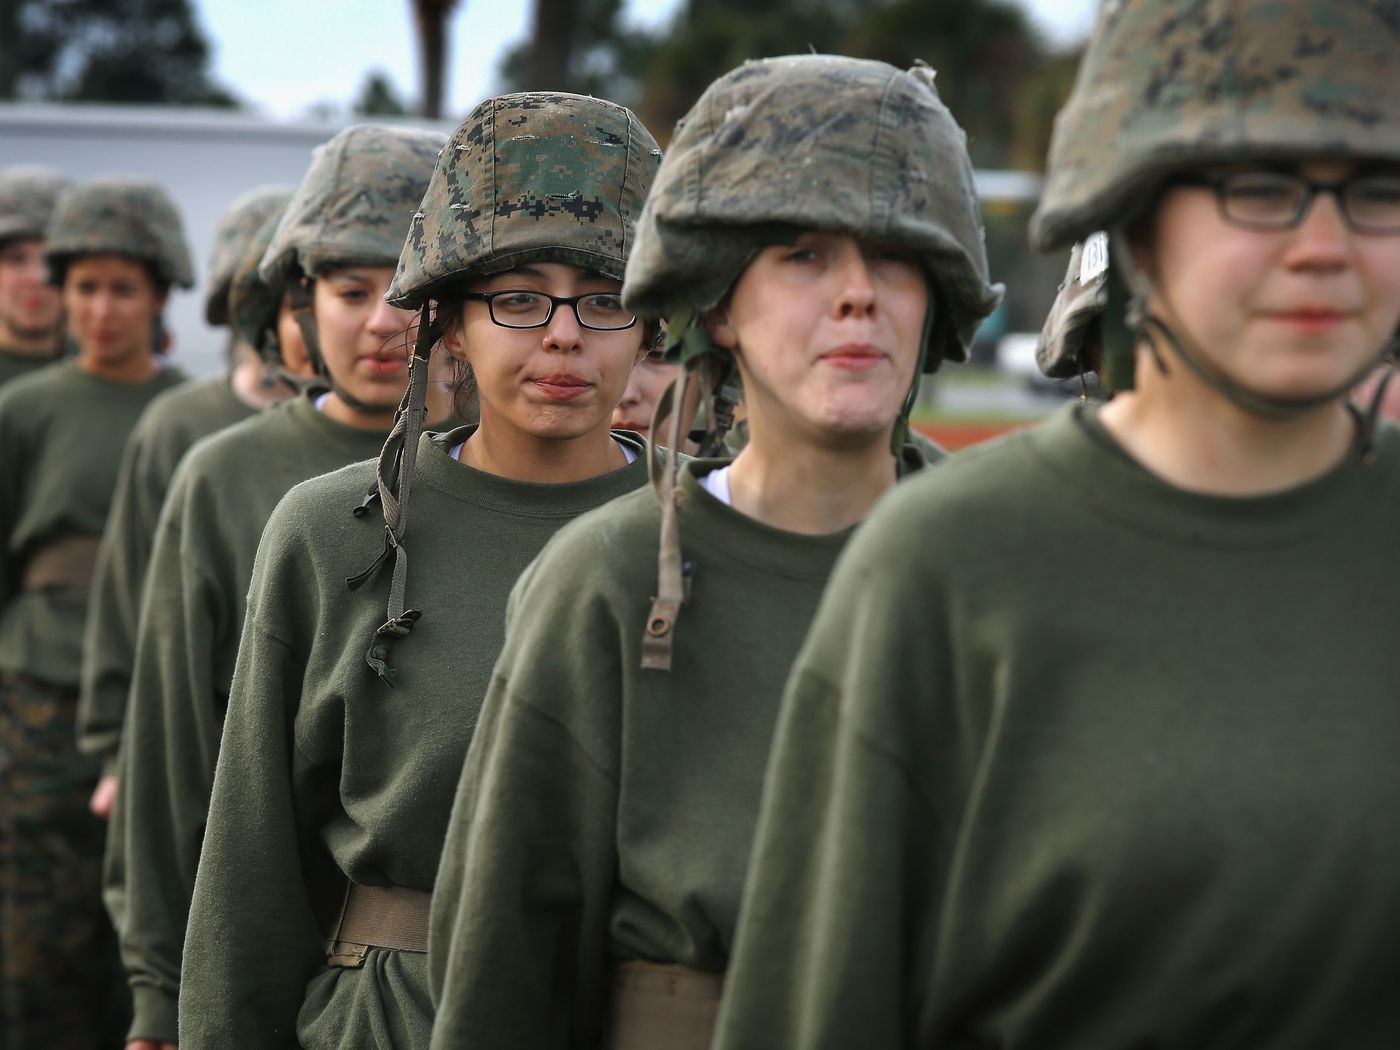 I was a Marine. I can't be silent about the sexual harassment I